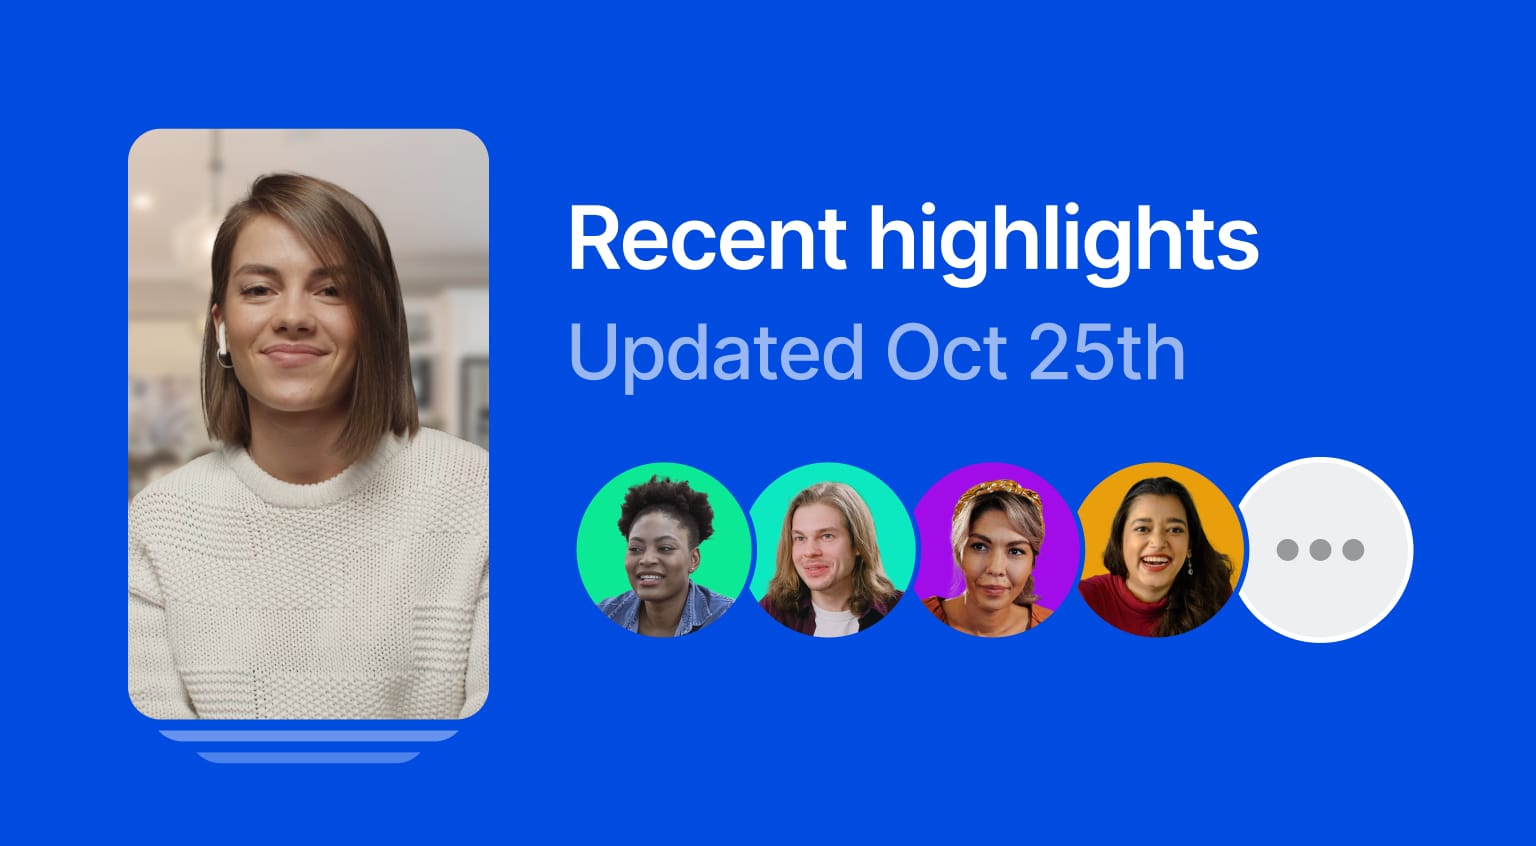 A vertically rectangular video card with a brown-haired woman with a white sweater to the left of text that reads Recent highlights, Updated Oct 25th, with 5 user avatars below